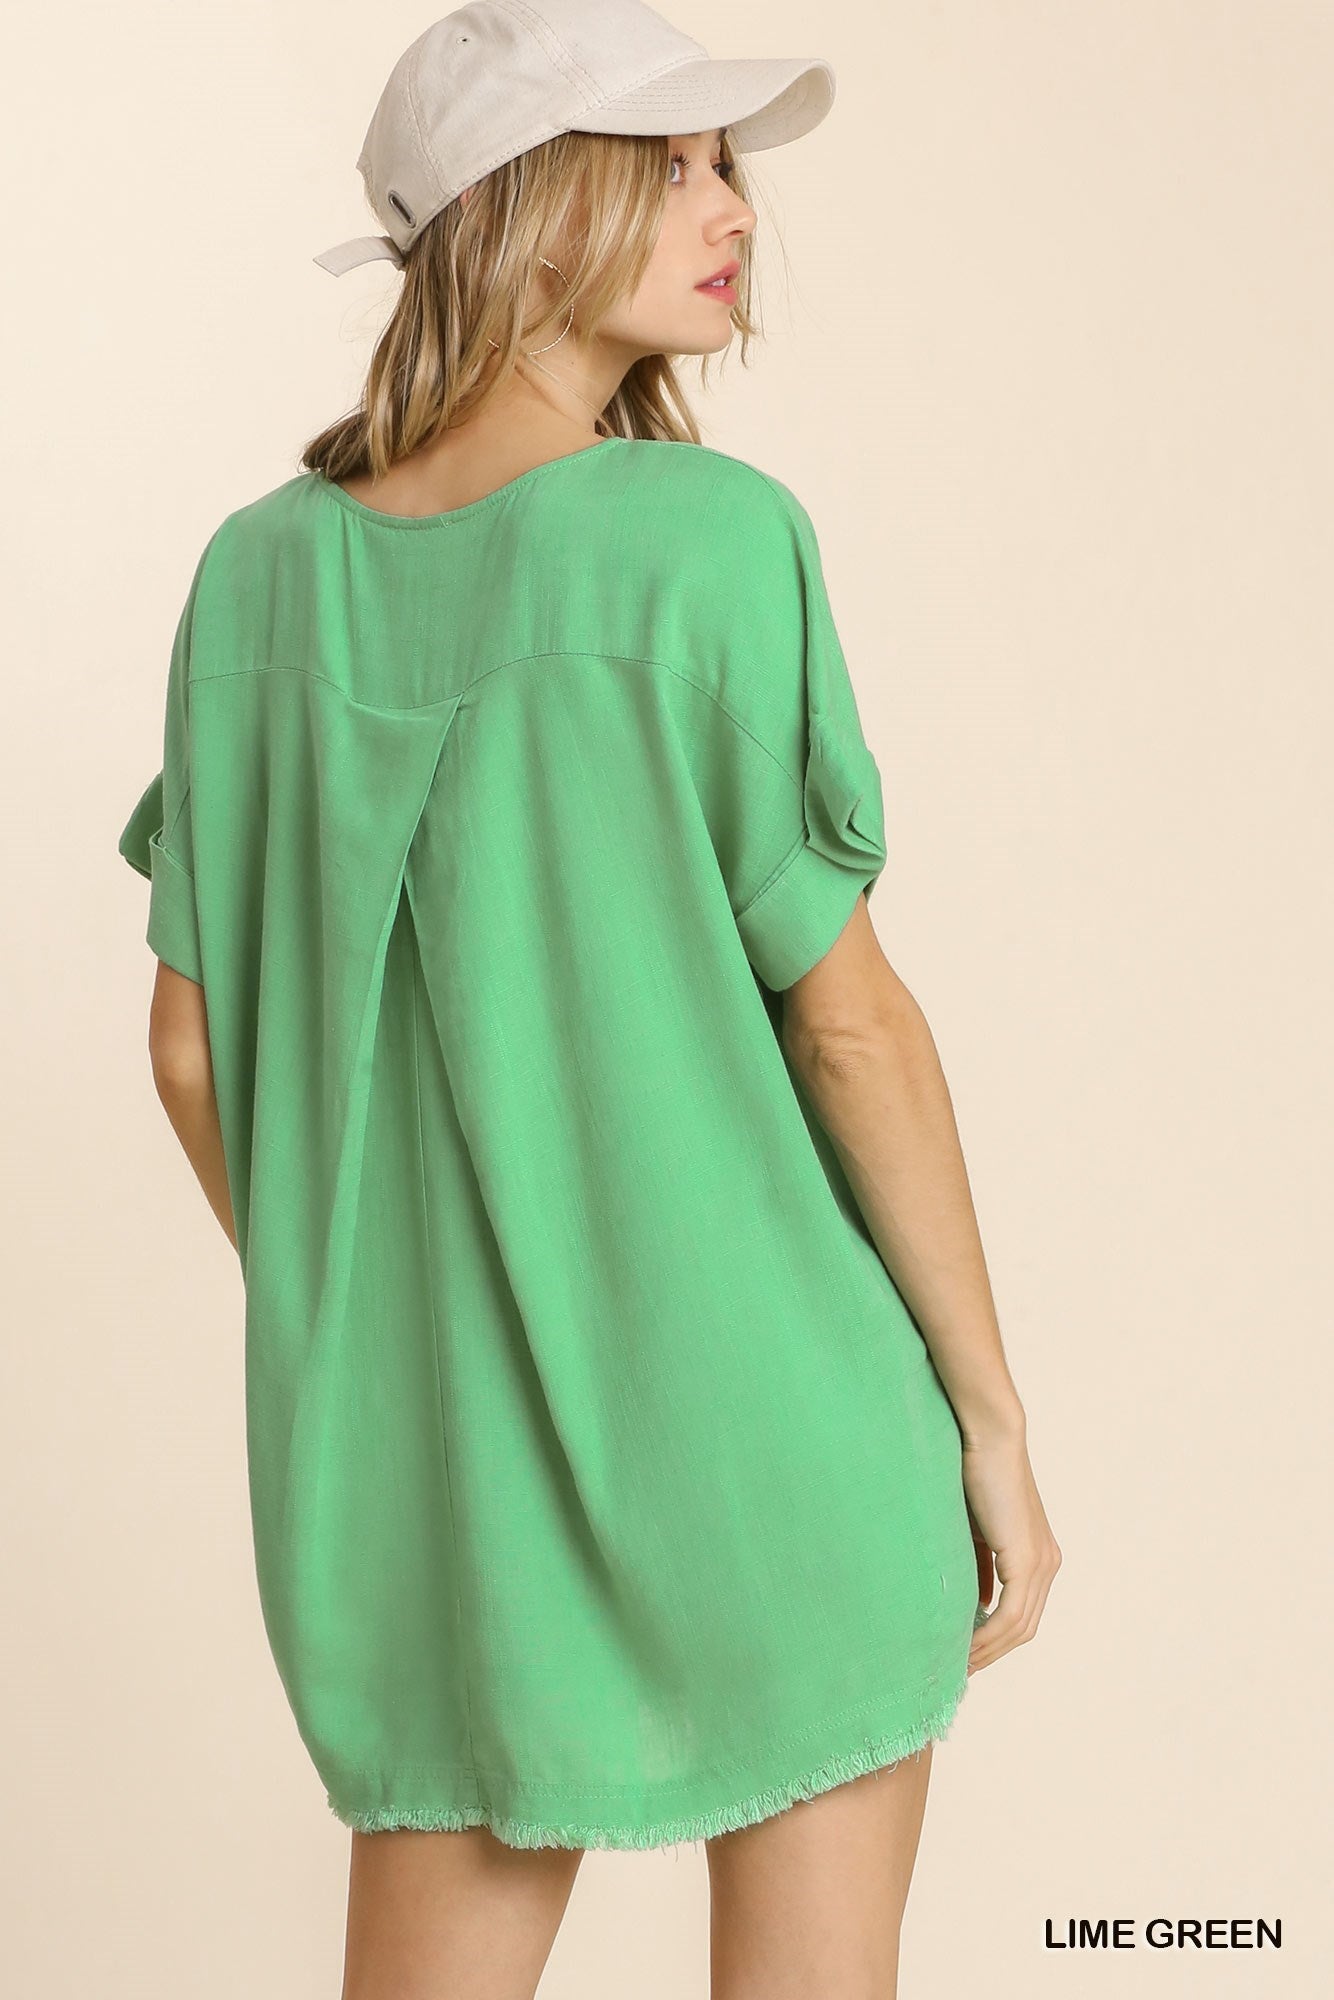 Lime Green Linen Blend Top with Cuffed Sleeves and Frayed Hemline Details